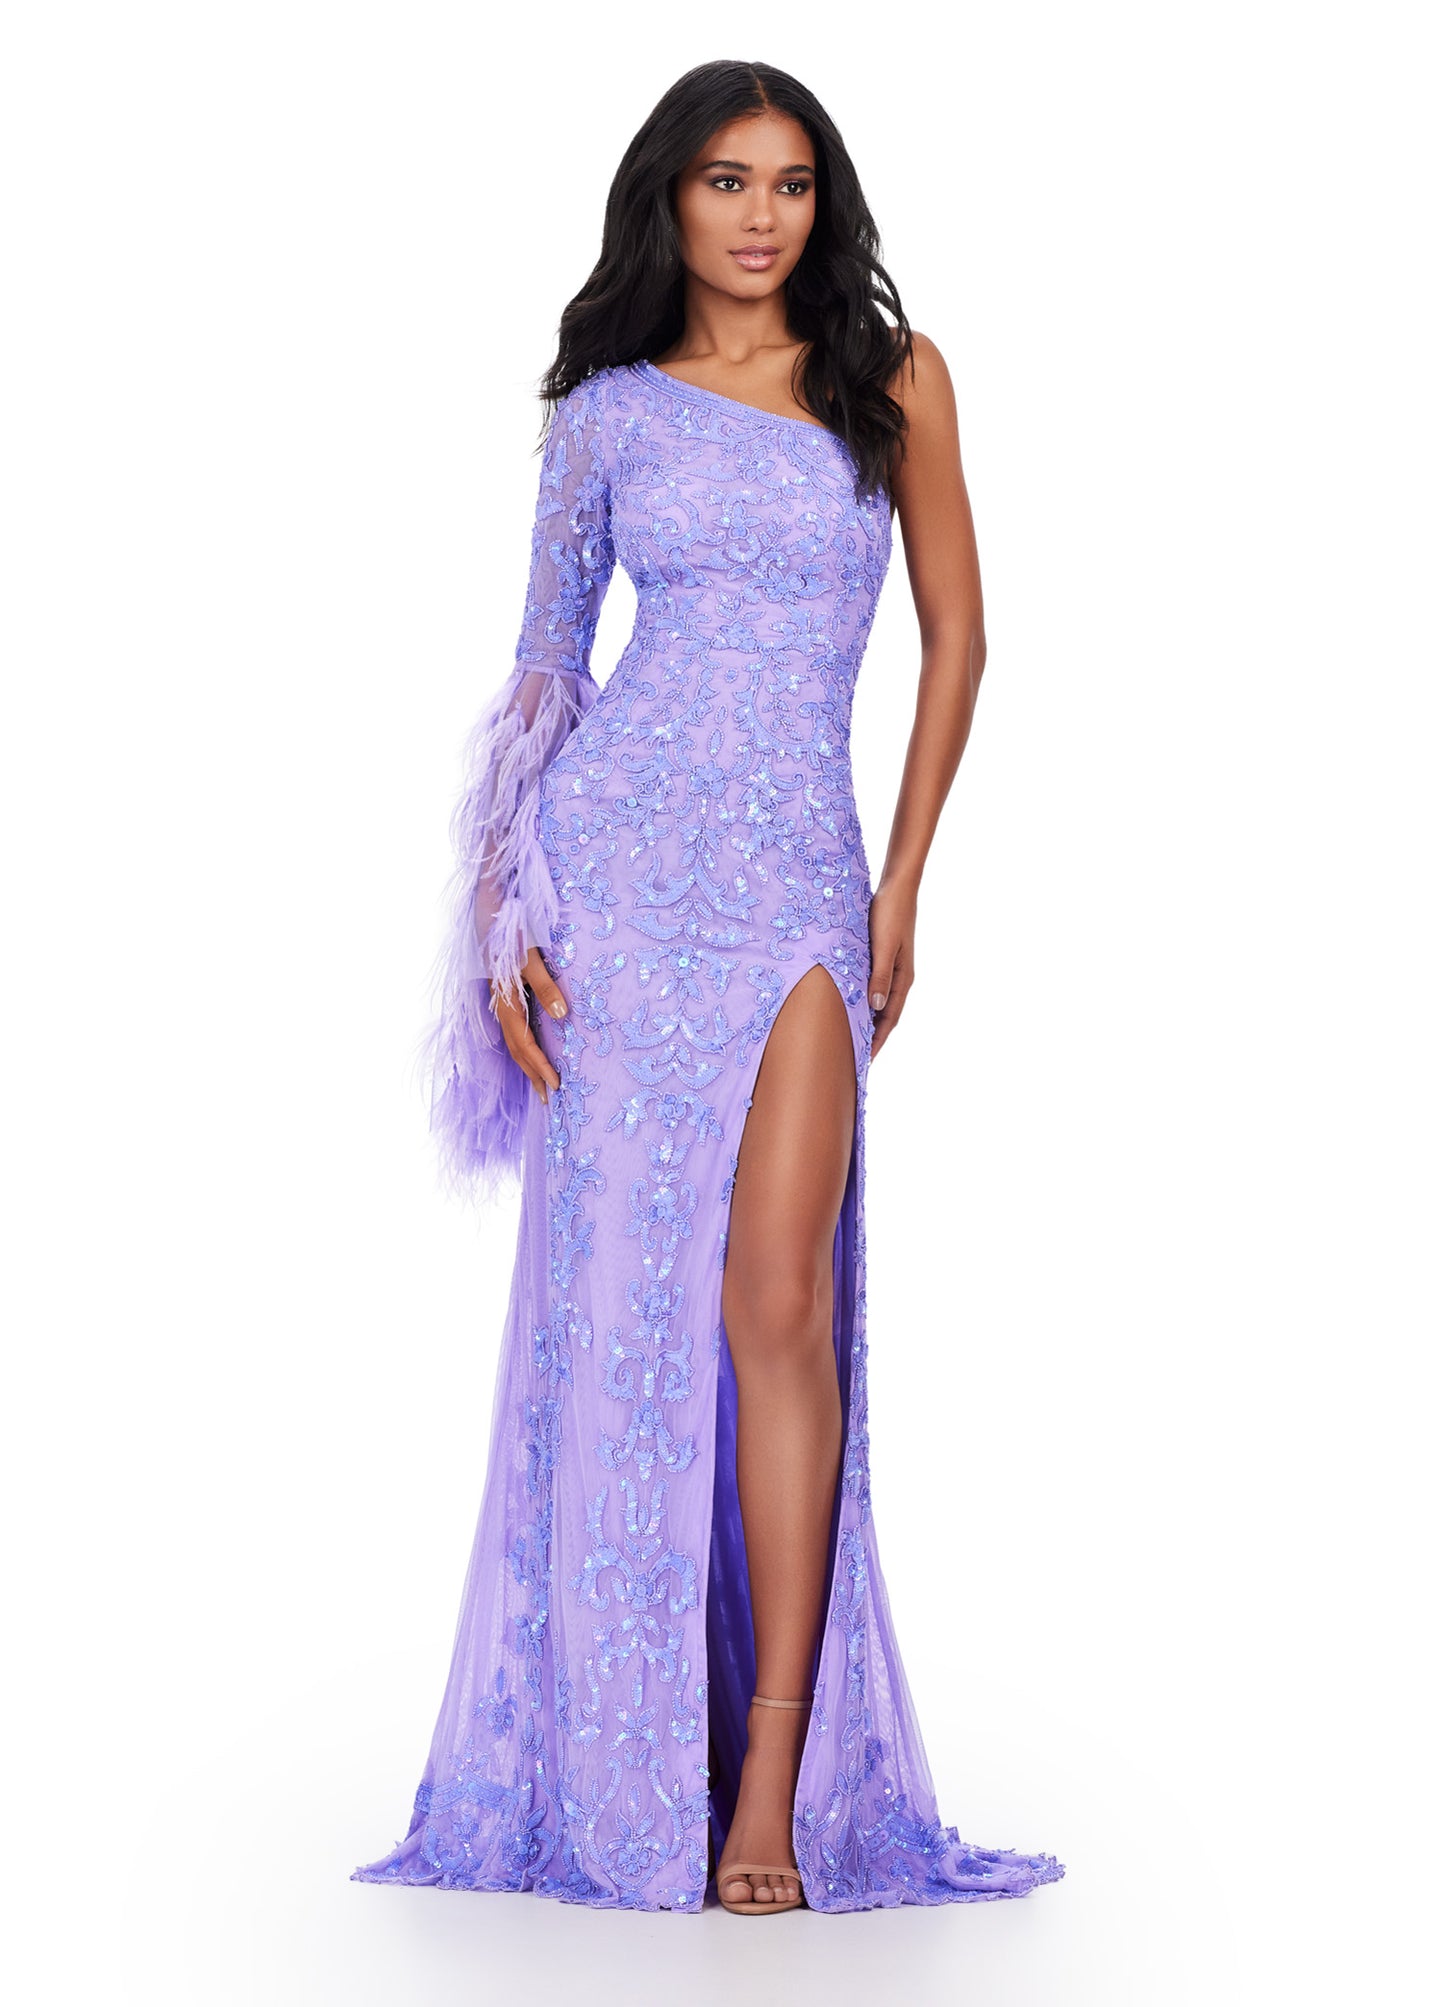 Make a statement in the Ashley Lauren 11452 Long Prom Dress. This stunning gown features a one shoulder design and full sequin embellishments, perfect for standing out at prom or a formal pageant. The bell sleeves add a touch of elegance to this standout piece. Available in multiple sizes. Elegant and fab! This one shoulder, fully beaded gown features a left leg slit and a dramatic feathered bell sleeve that takes this look to the next level.